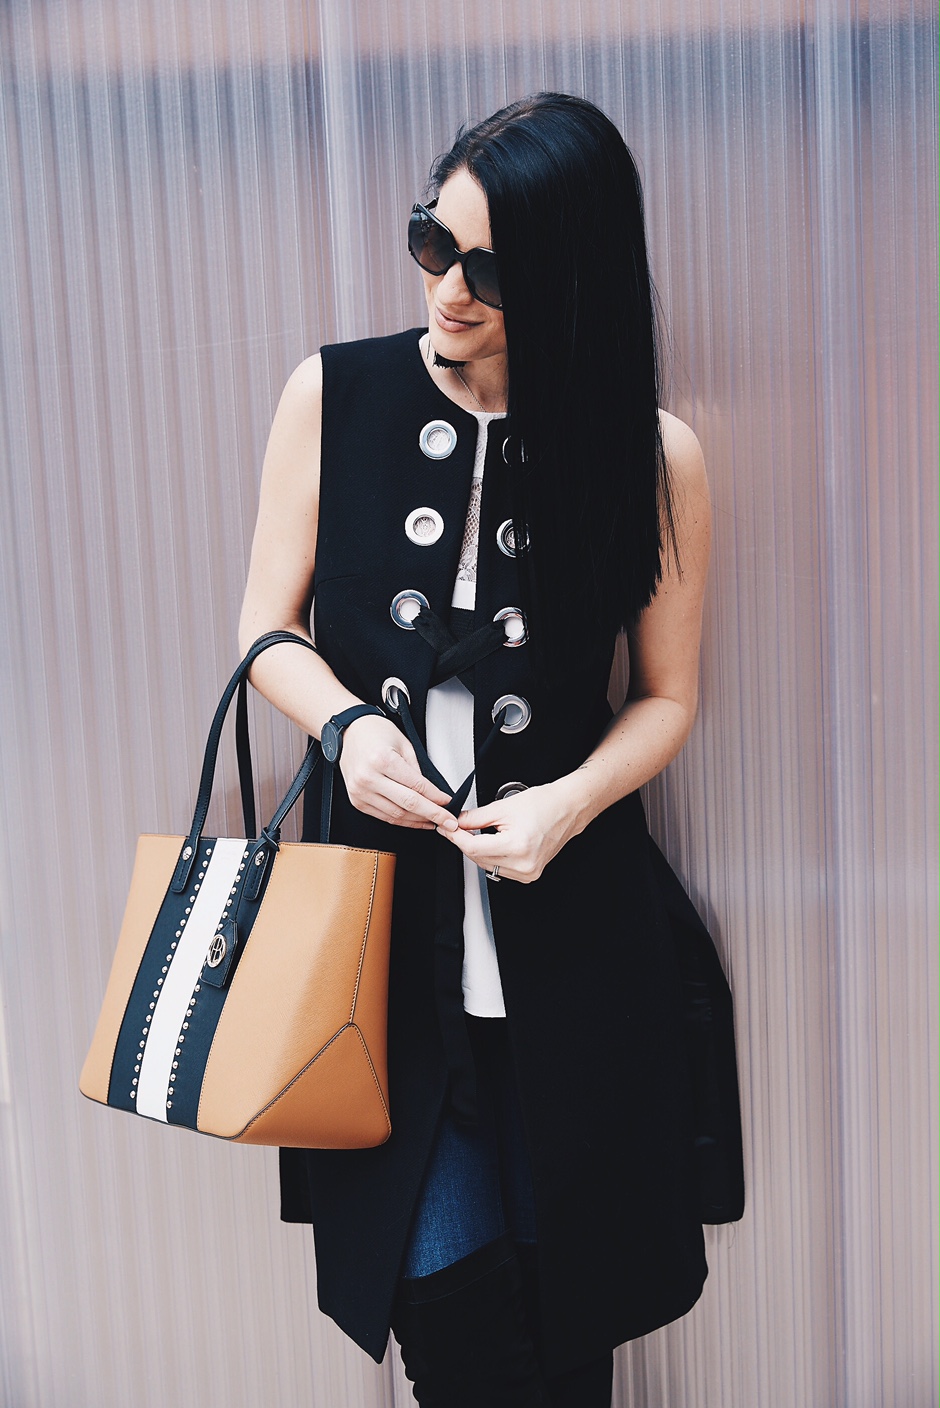 DTKAustin shows how to wear a vest to transition into Spring. Click for more details on this OOTD. Zara Vest, Henri Bendel Bag, and a CamiNYC tank.